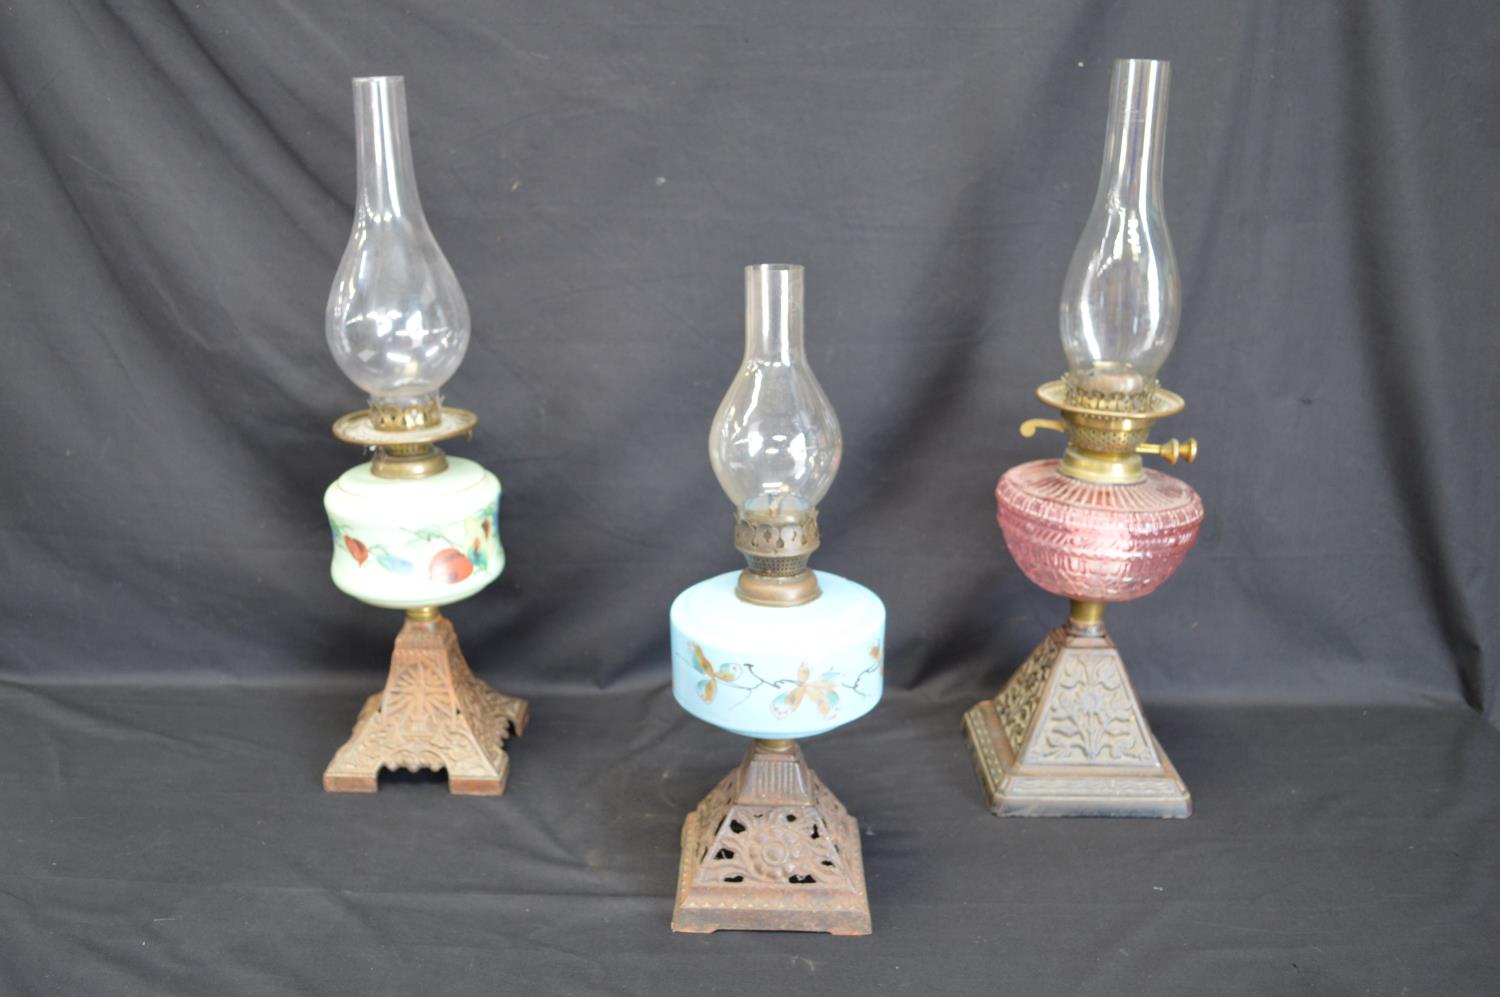 Group of three iron based oil lamps each having glass reservoir and chimney - tallest 57.5cm